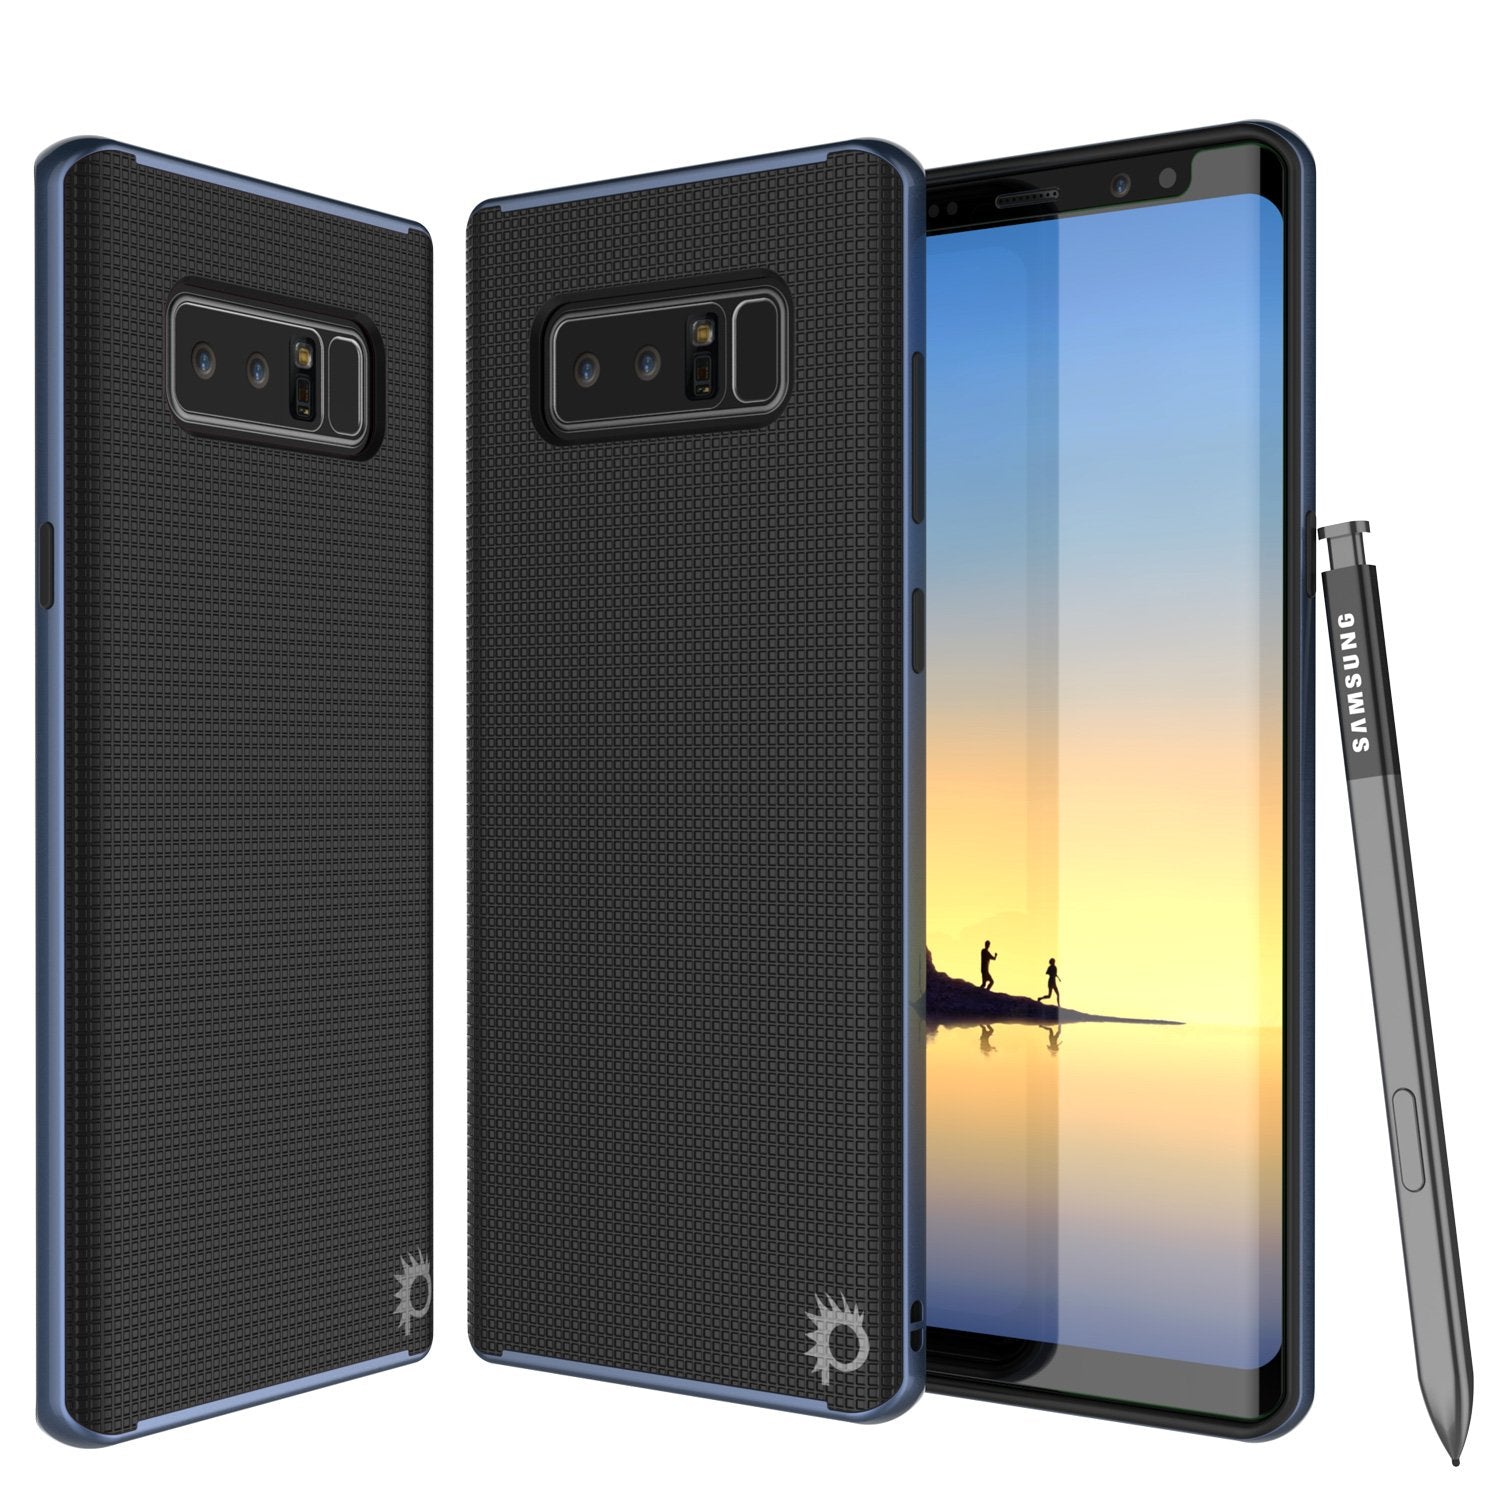 Galaxy Note 8 Case, PunkCase [Stealth Series] Hybrid 3-Piece Shockproof Dual Layer Cover [Non-Slip] [Soft TPU + PC Bumper] with PUNKSHIELD Screen Protector for Samsung Note 8 [Navy Blue]